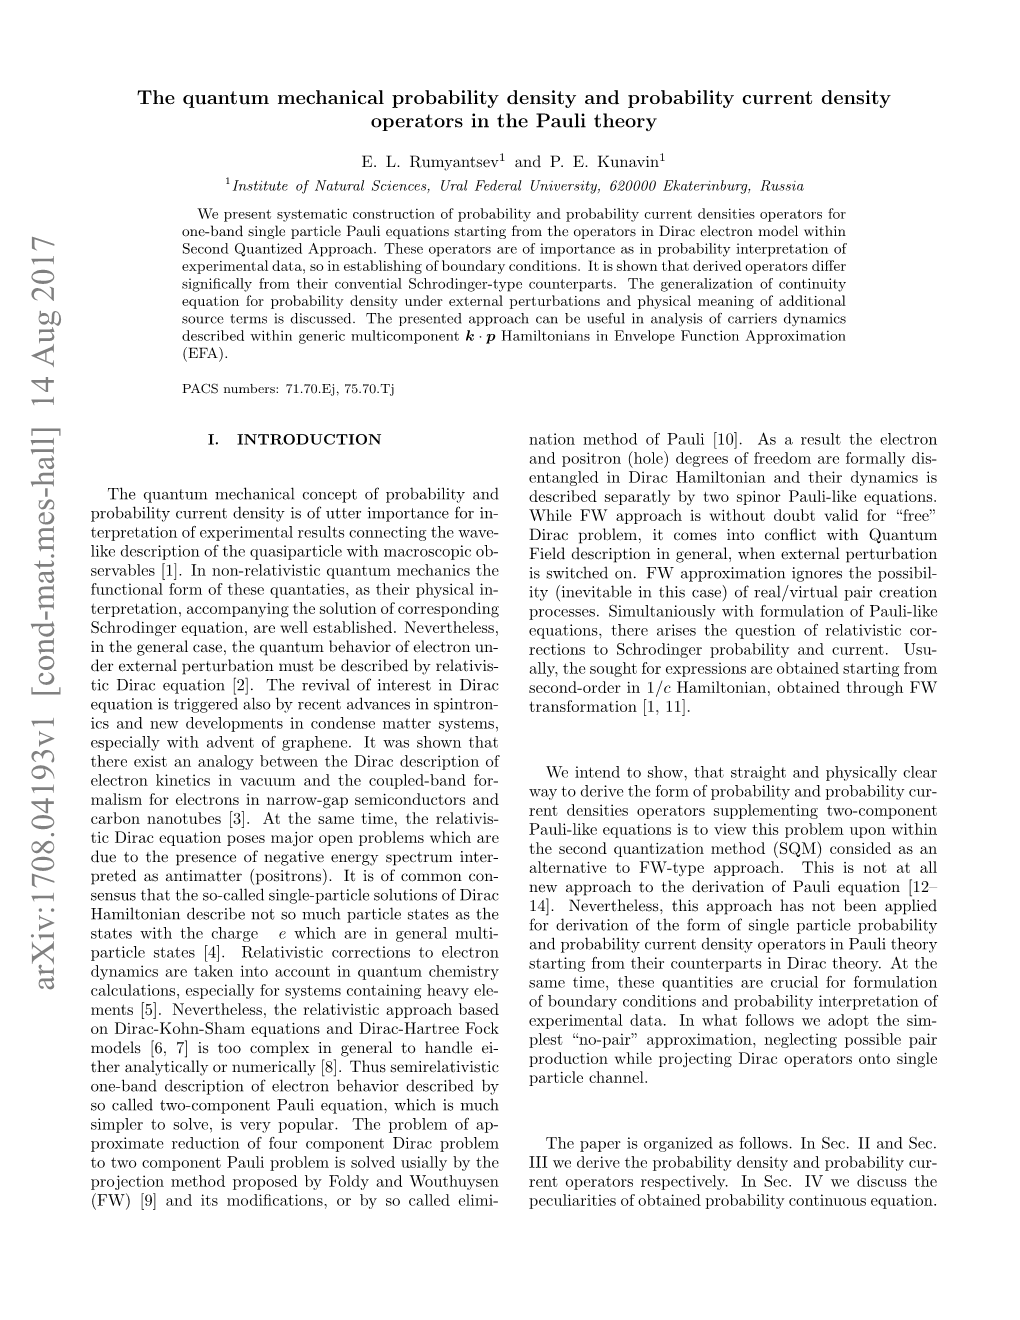 The Quantum Mechanical Probability Density and Probability Current